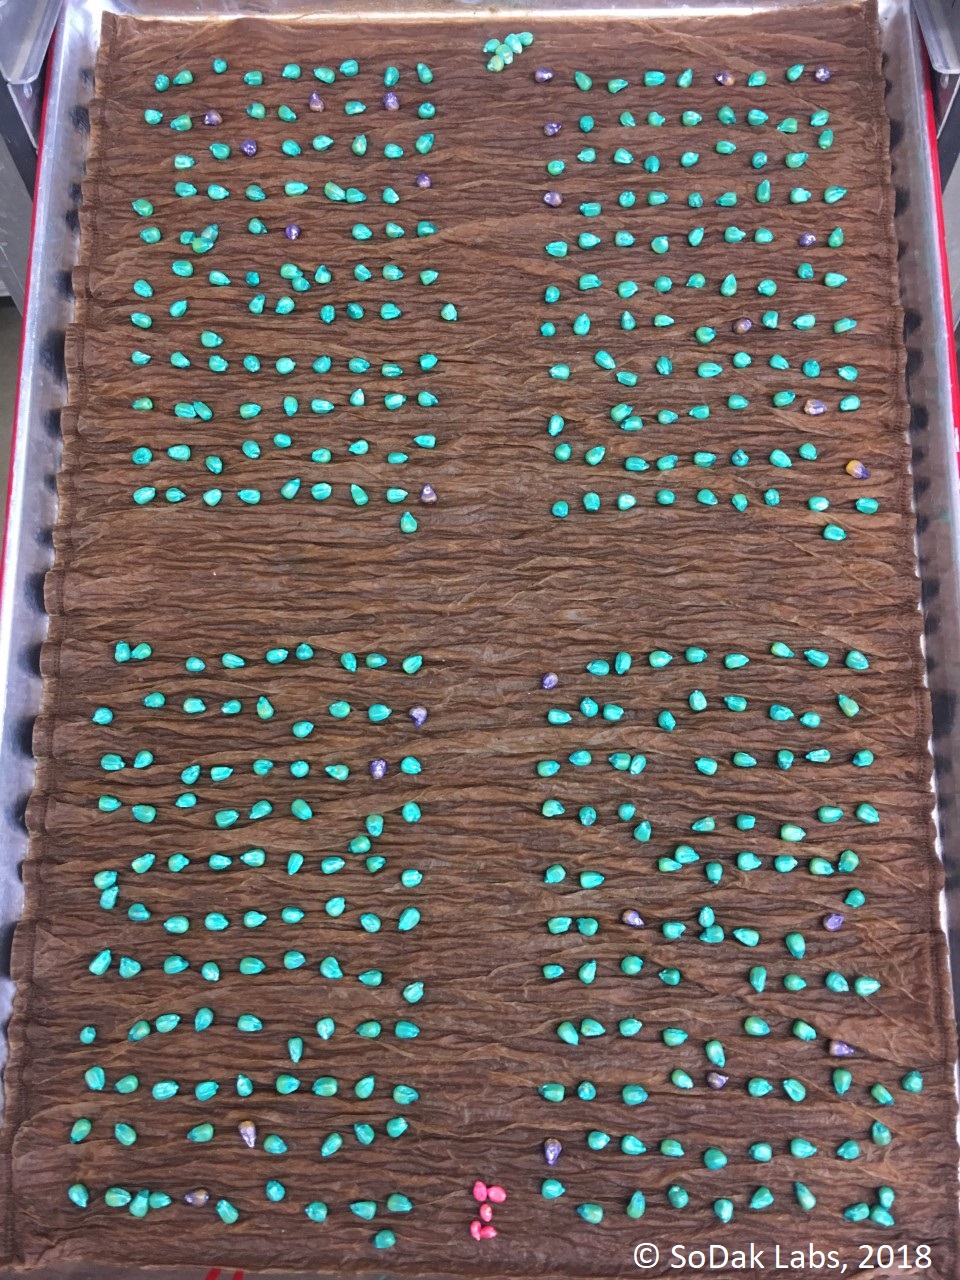 Herbicide Bioassay tray test. Five pink seeds in the front and 5 green seeds in the back are check seeds.